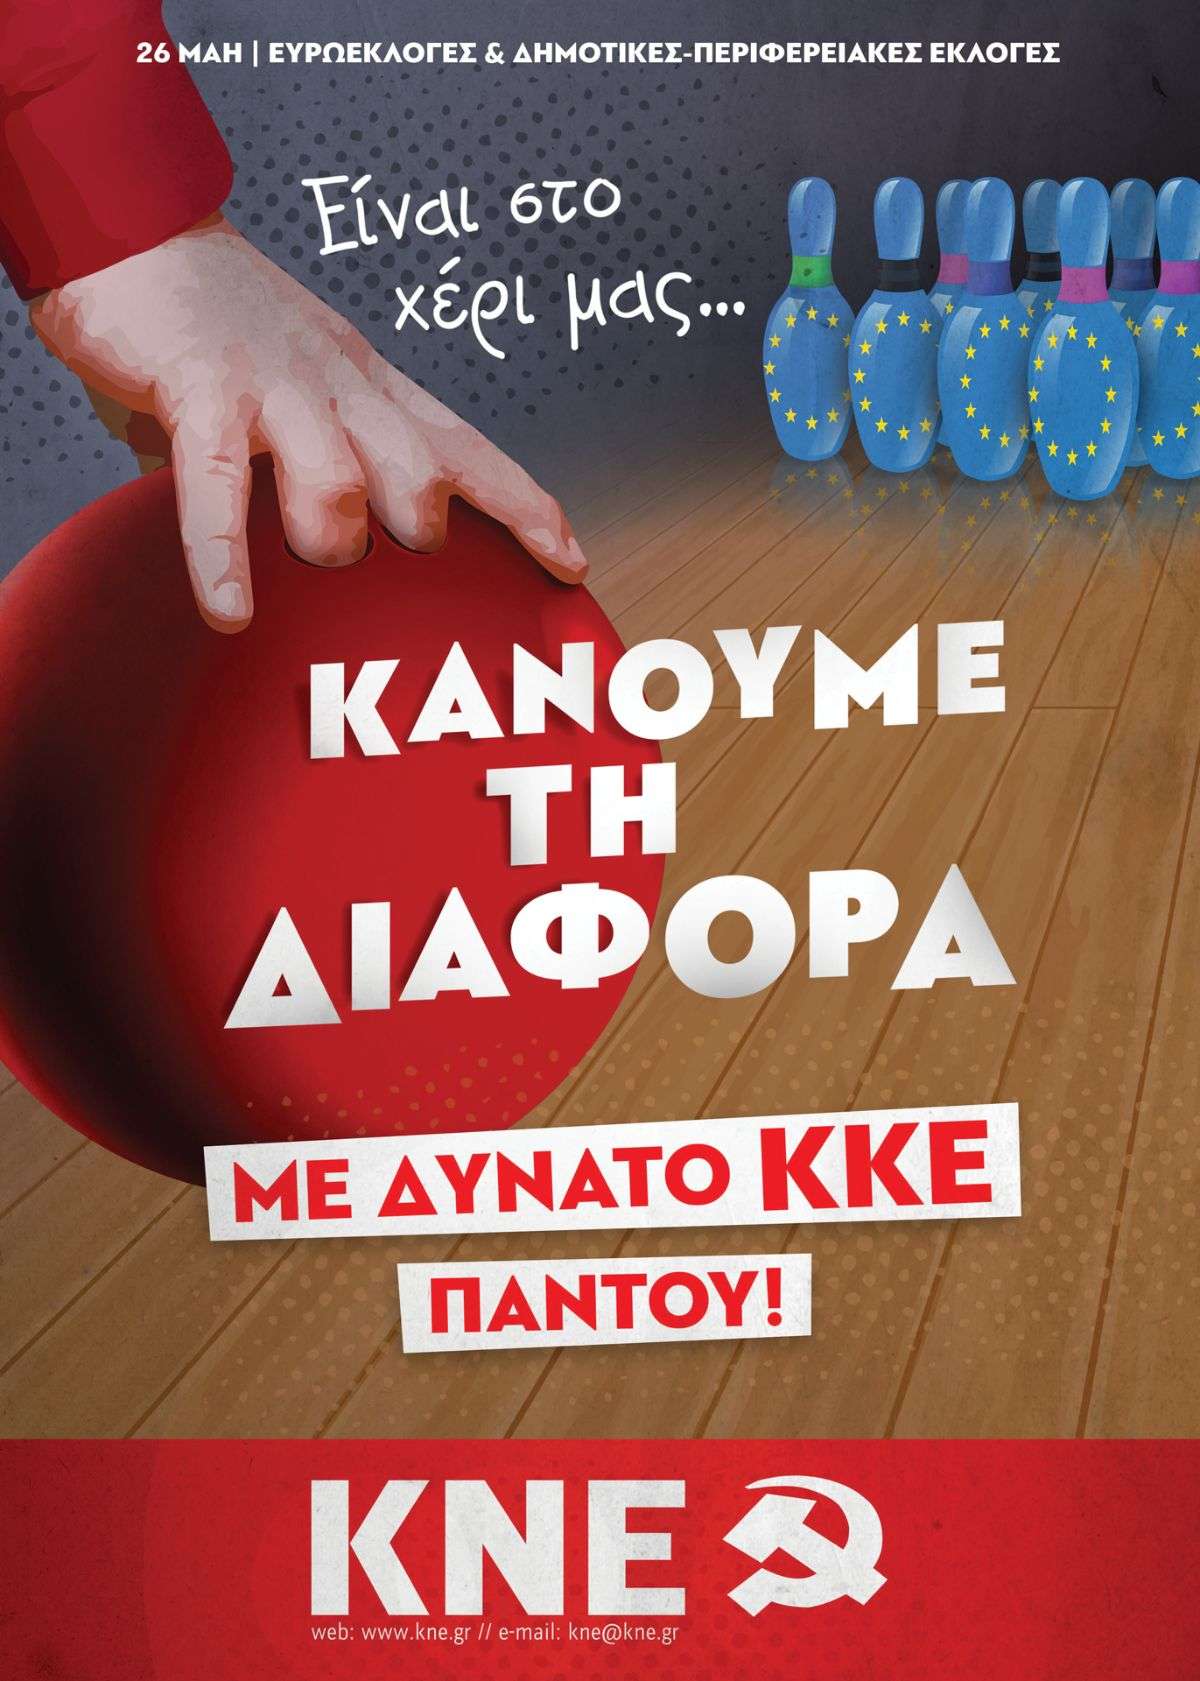 KNE ΚΝΕ poster bowling